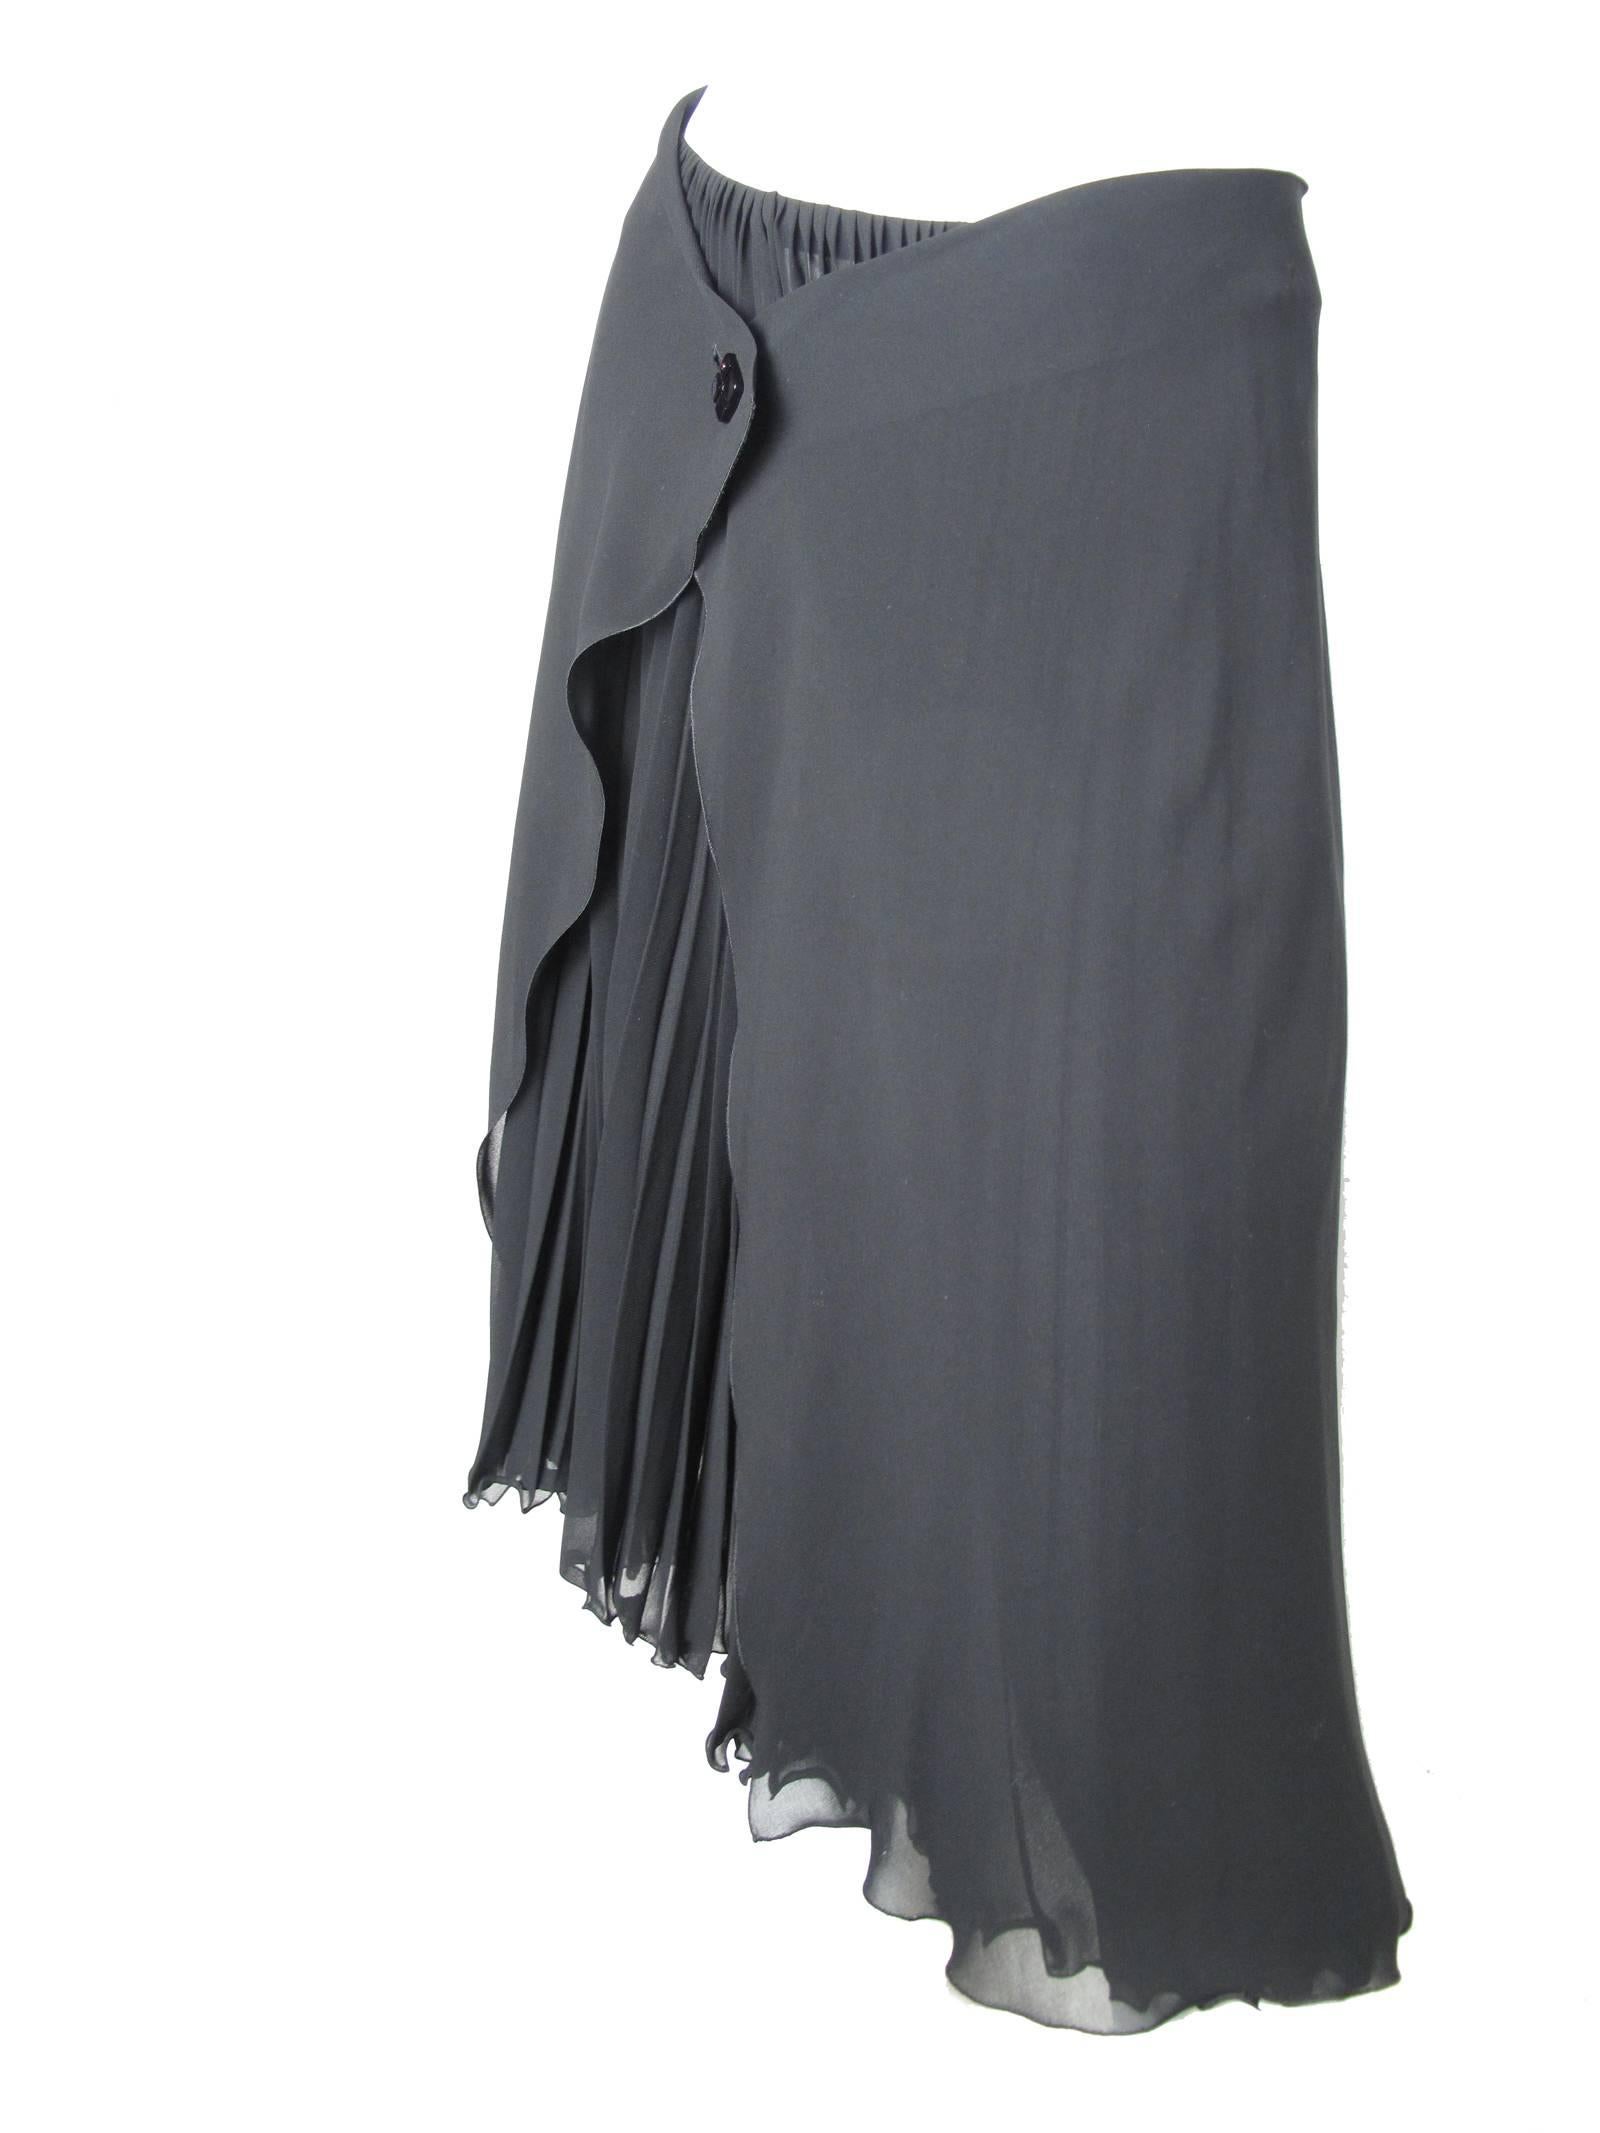 2000 Chanel black silk chiffon plain over pleated silk skirt. Condition; excellent.  Size 42/ US 8 - 10  